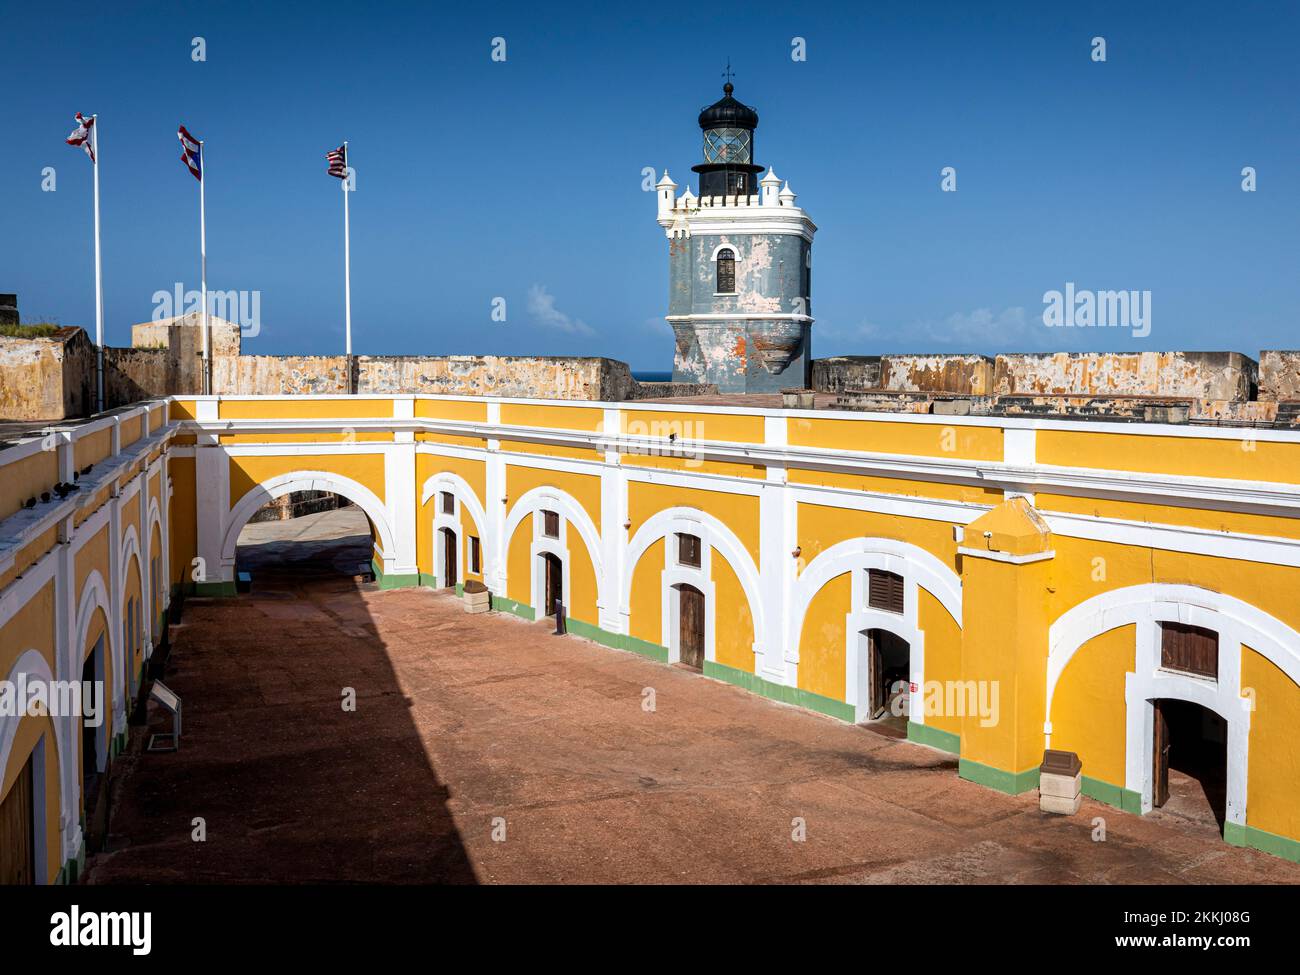 El Morro Fort and Lighthouse, Old San Juan, on the tropical Caribbean island of Puerto Rico, USA. Stock Photo